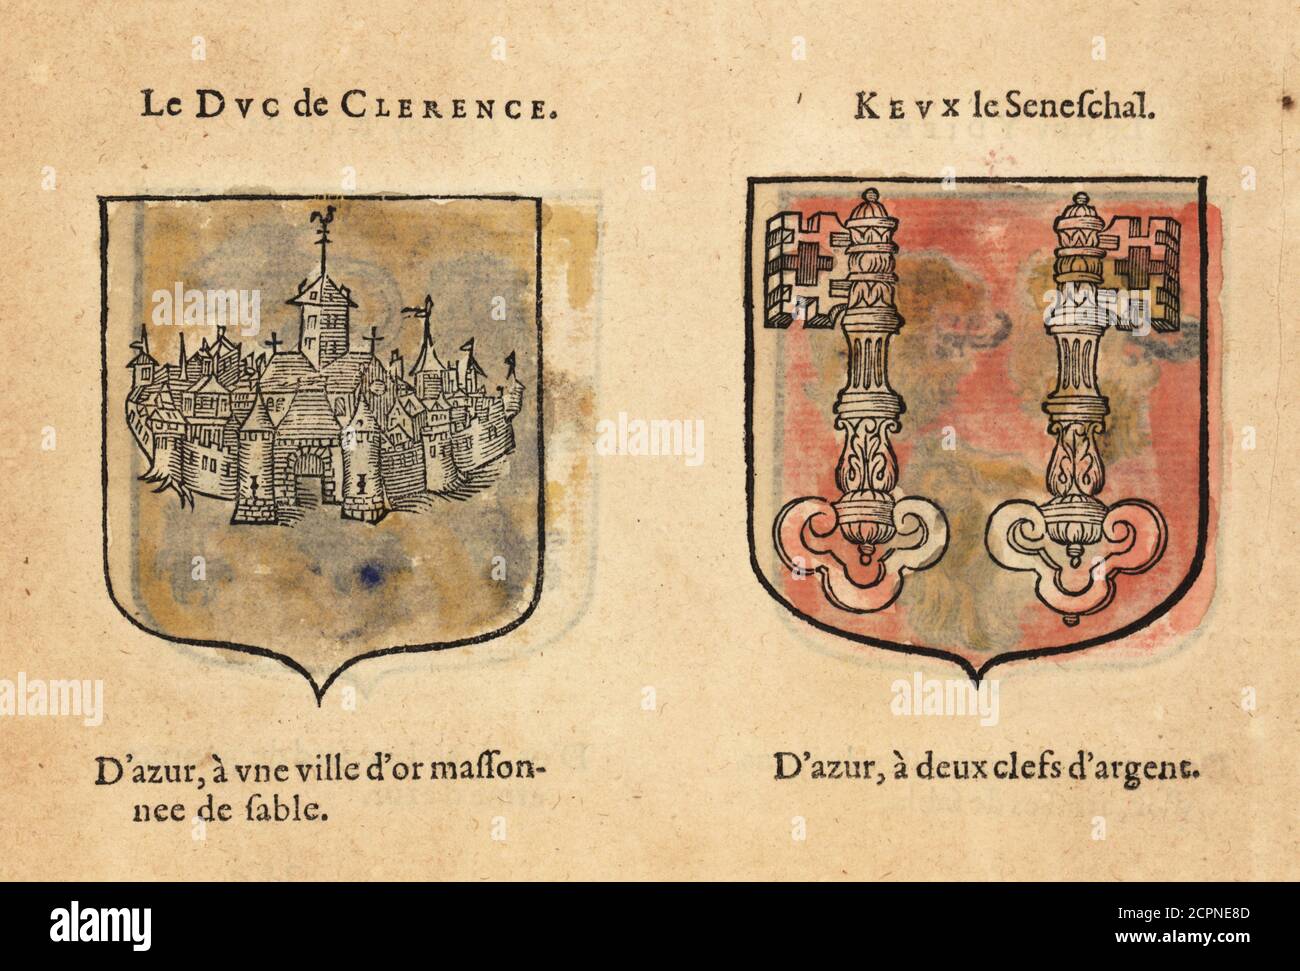 Imaginary coats of arms of King Arthur’s Knights of the Round Table: Galeschin, Duke of Clarence, with golden town, and Sir Kay with silver keys. Chevaliers de la table ronde: Le DUC de CLERENCE, KEUX le Seneschal. Handcoloured woodblock engraving from Hierosme de Bara’s Le Blason des Armoiries, Chez Rolet Boutonne, Paris, 1628 Stock Photo